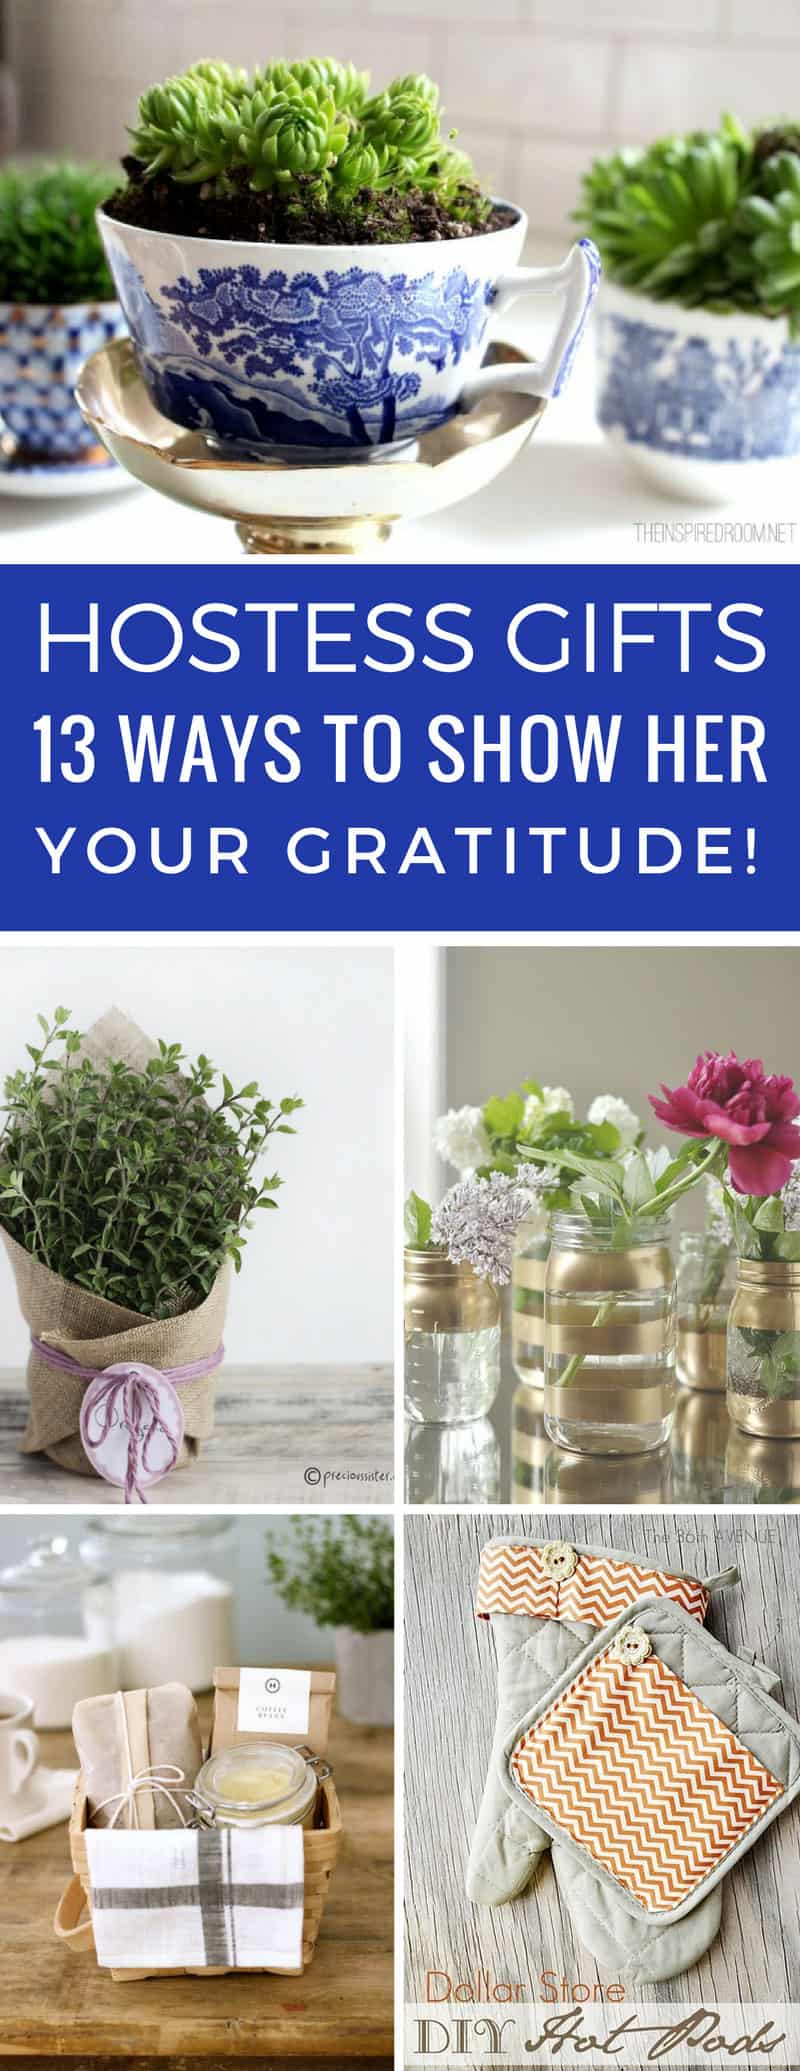 Wow - so many thoughtful DIY hostess gift ideas here - perfect for Christmas and Thanksgiving! Thanks for sharing!